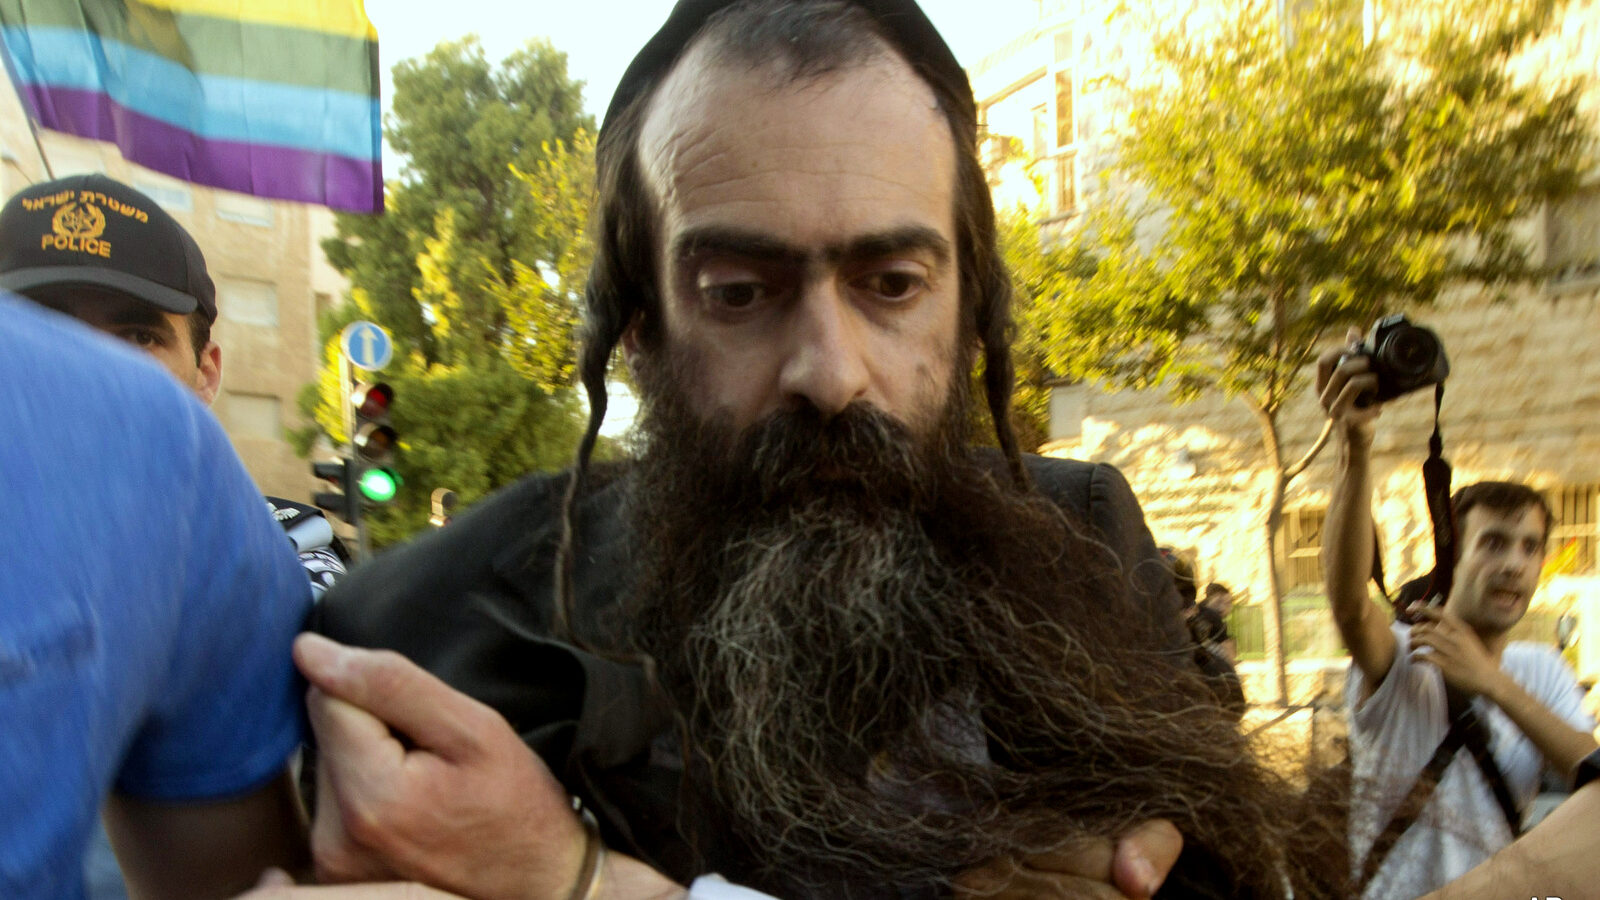 Ultra Orthodox Jew Yishai Schlissel is detained by plain-clothes police officers after he stabbed people during a gay pride parade in Jerusalem on Thursday, July 30, 2015. Schlisse was recently released from prison after serving a term for stabbing several people at a gay pride parade in 2005, a police spokeswoman said.